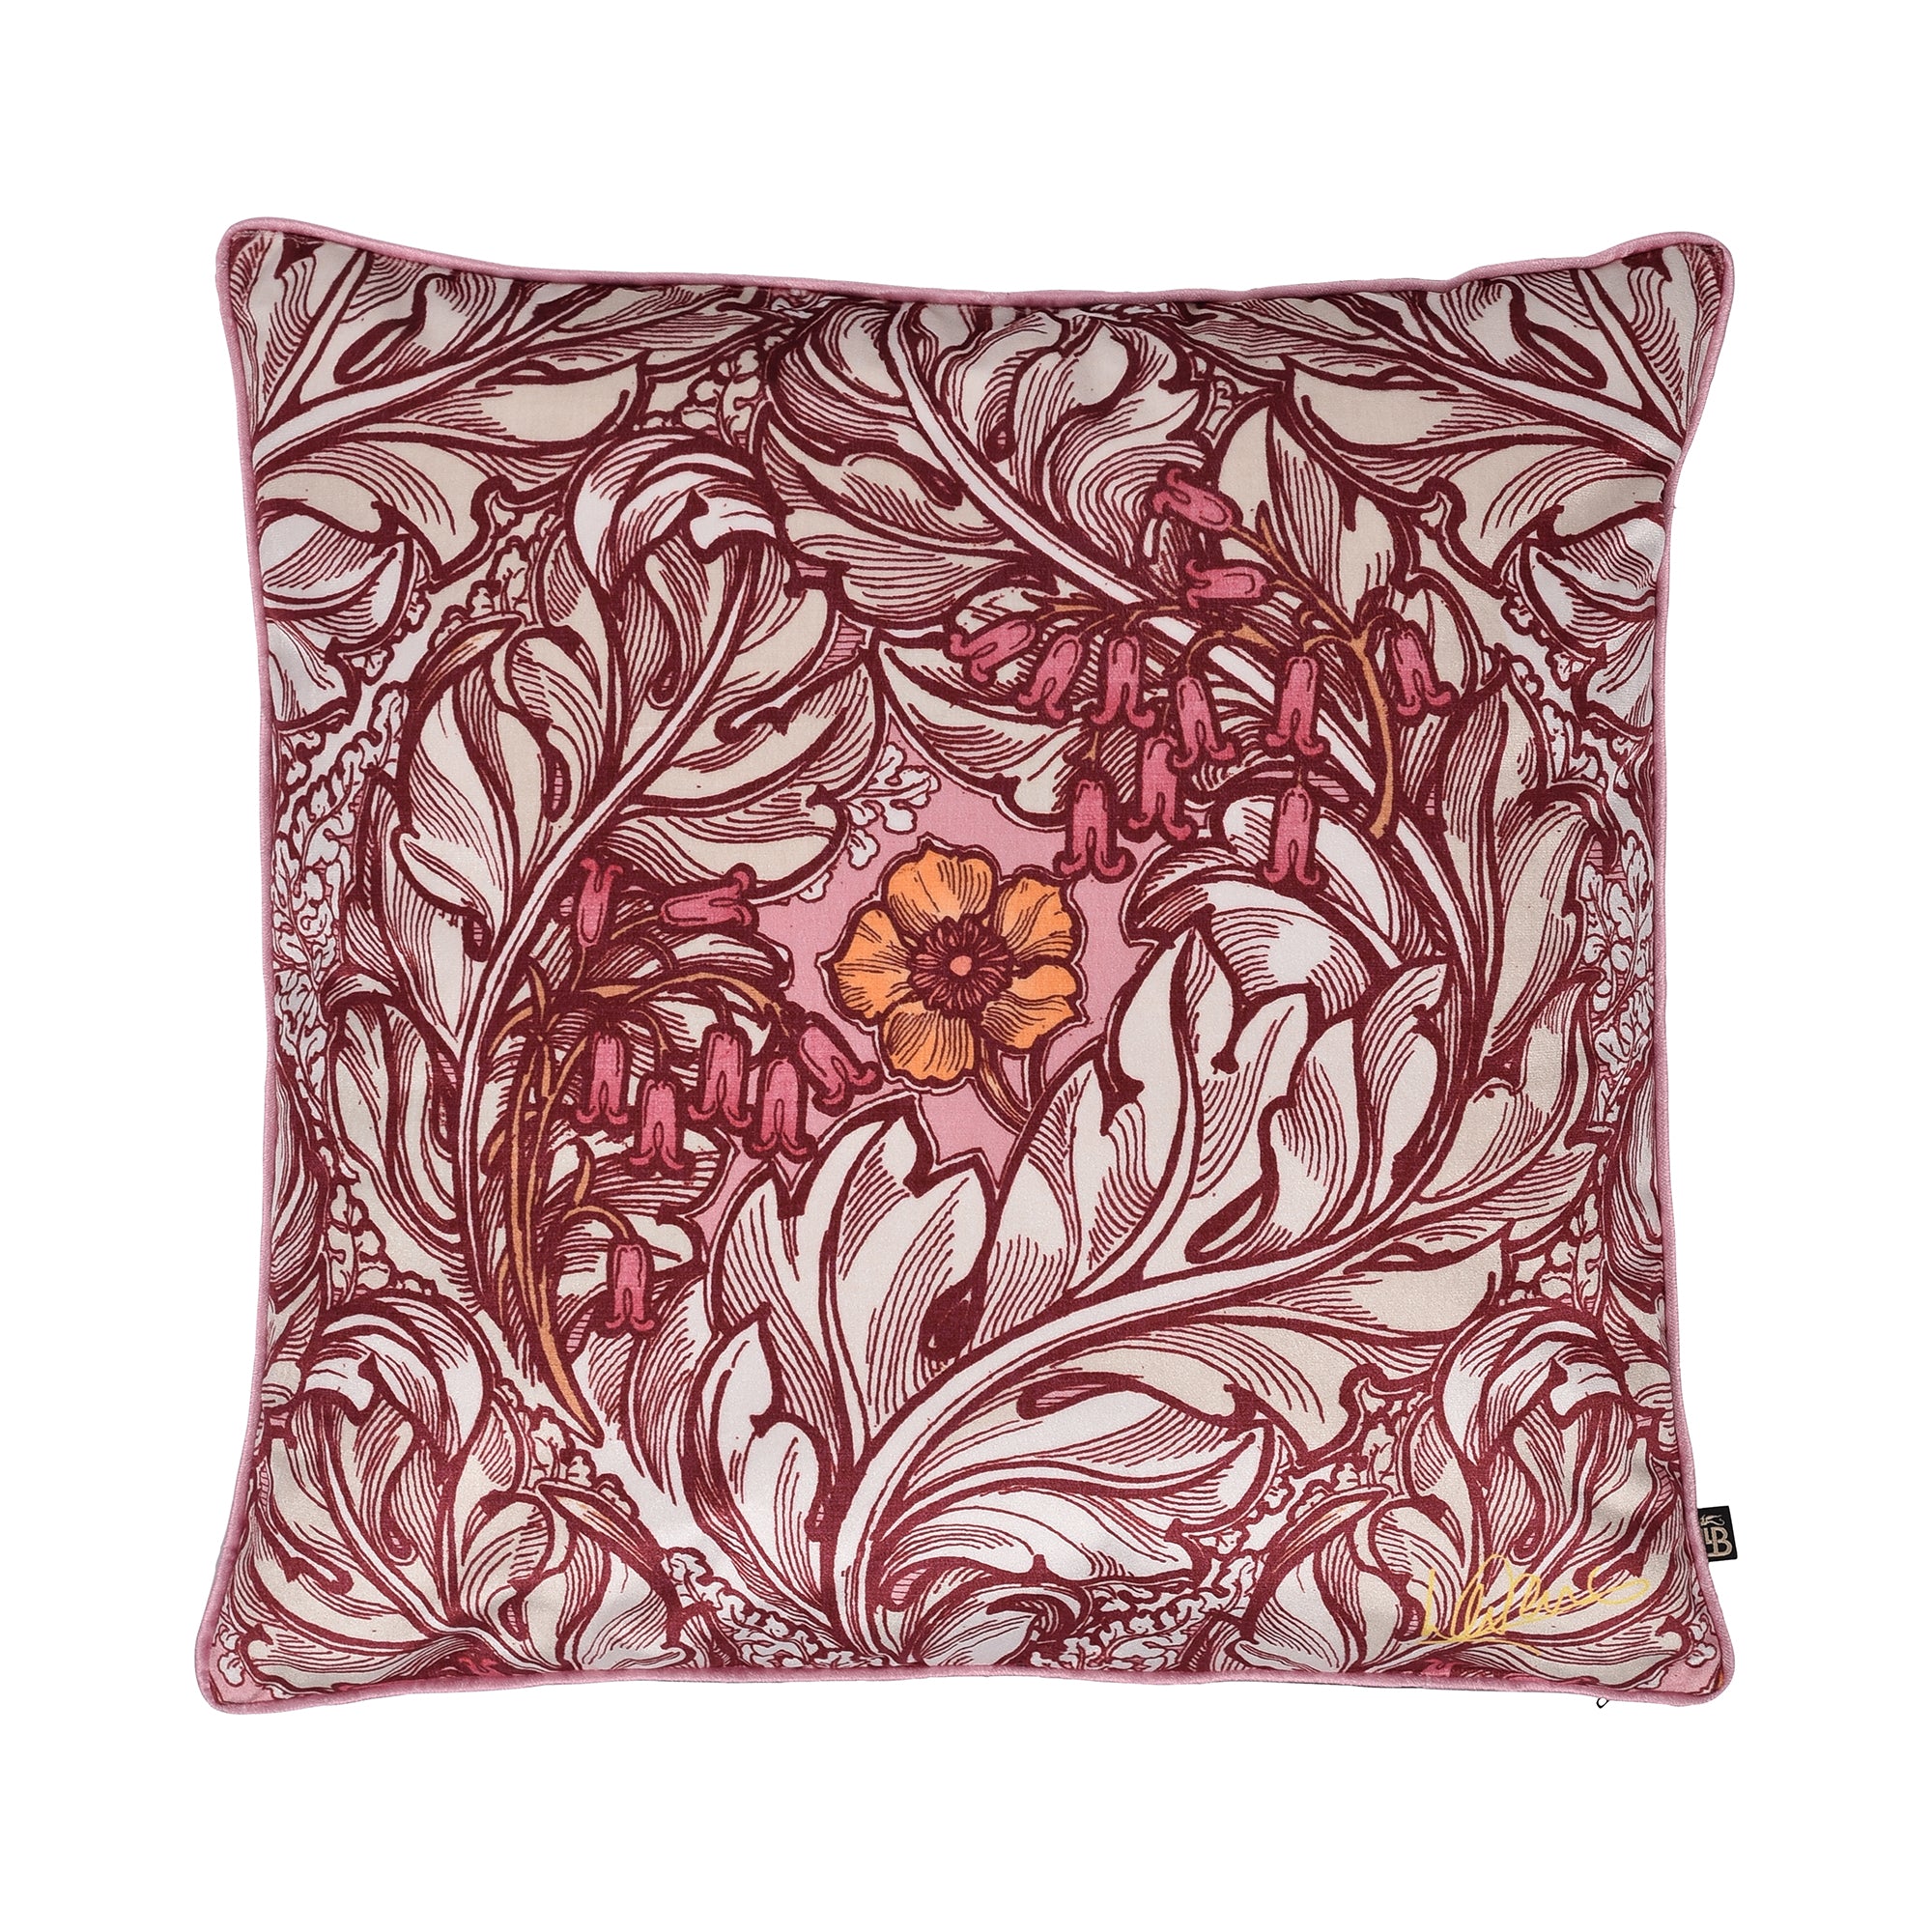 Cushion Cover Rambleicious by Laurence Llewelyn-Bowen in Claret